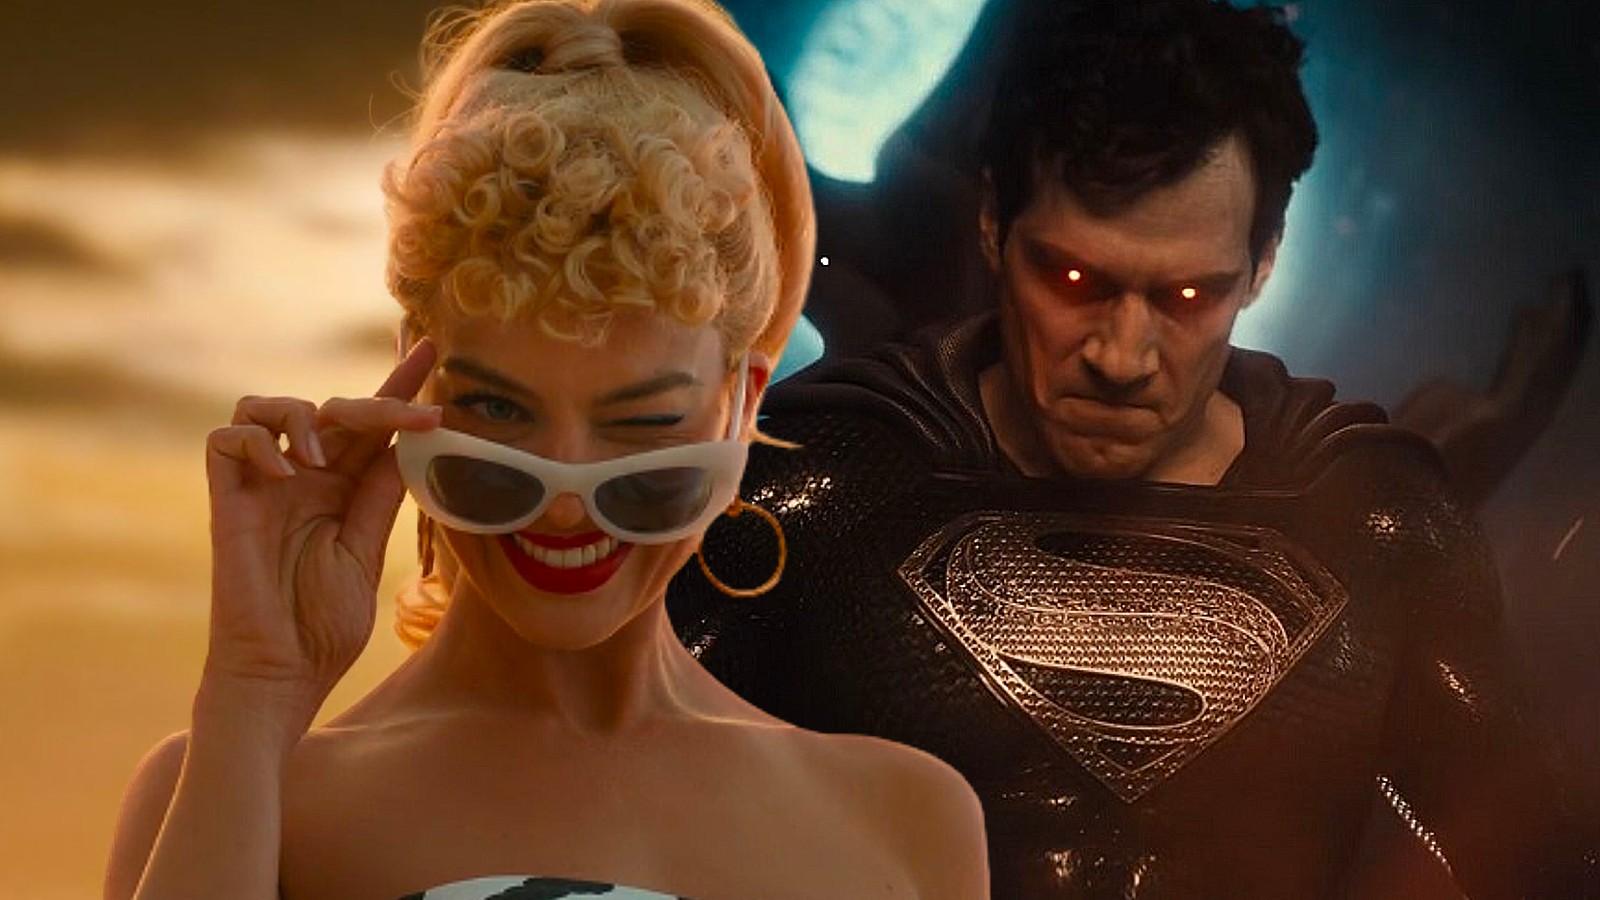 Margot Robbie as Barbie and Henry Cavill in Zack Snyder's Justice League cut